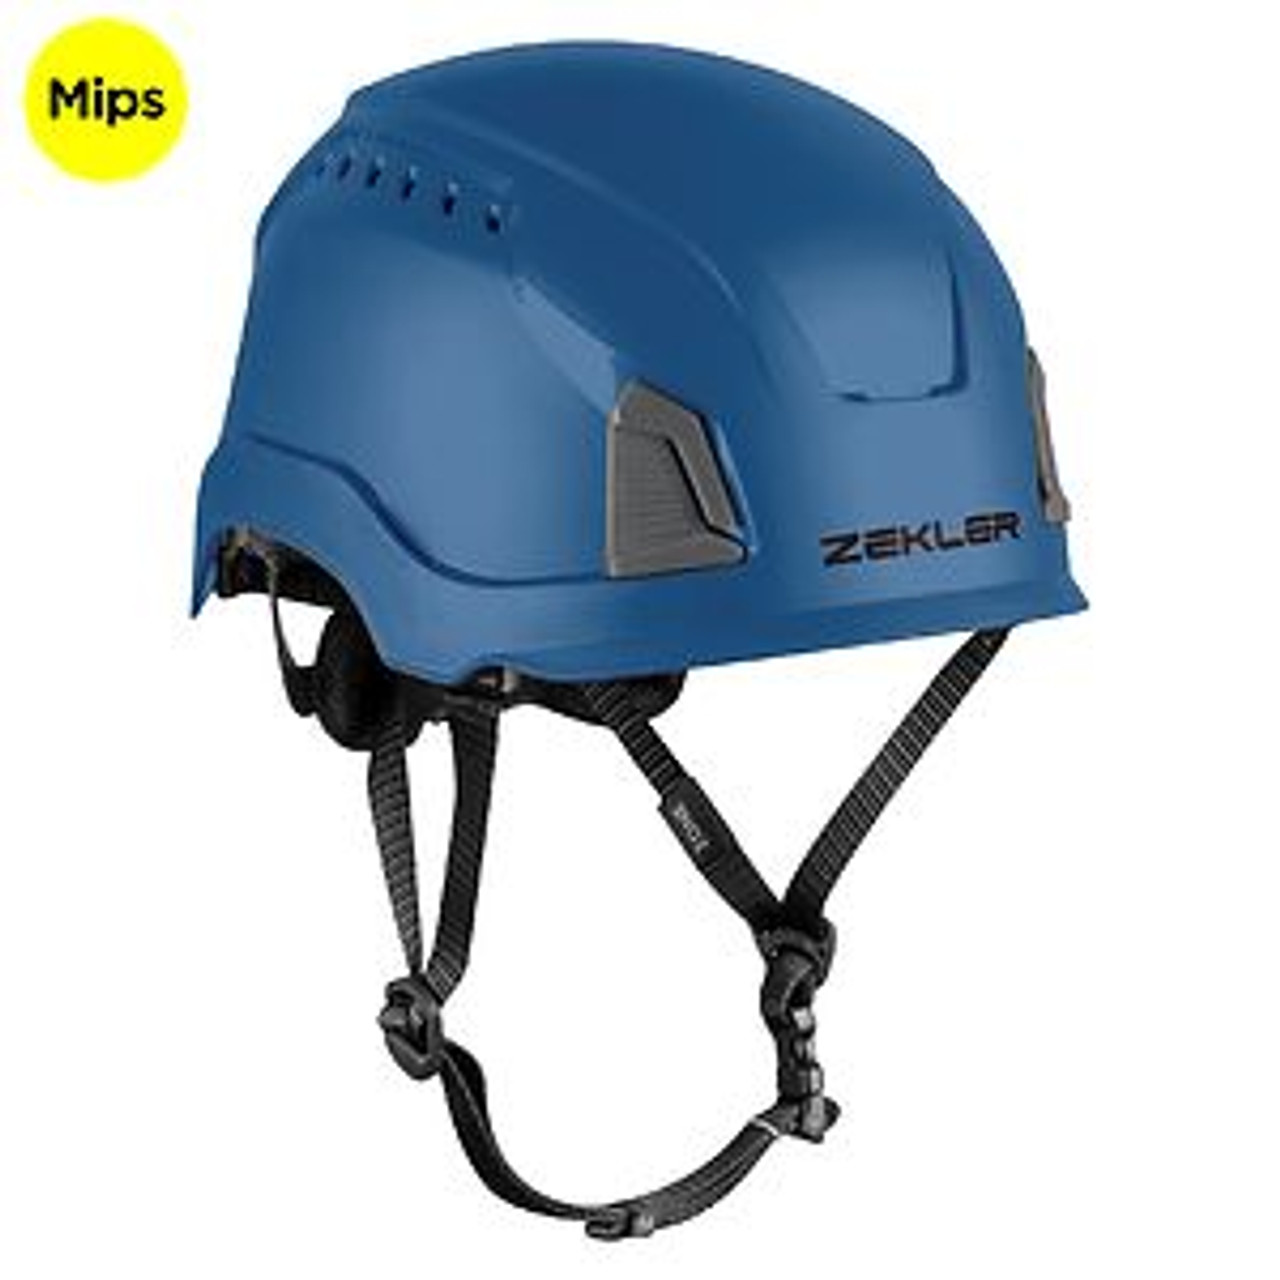 ZEKLER Helmet | ZONE Blue Technical Safety Helmet  with MIPS for Rope Access, Electricians in Melbourne, Sydney and Brisbane.